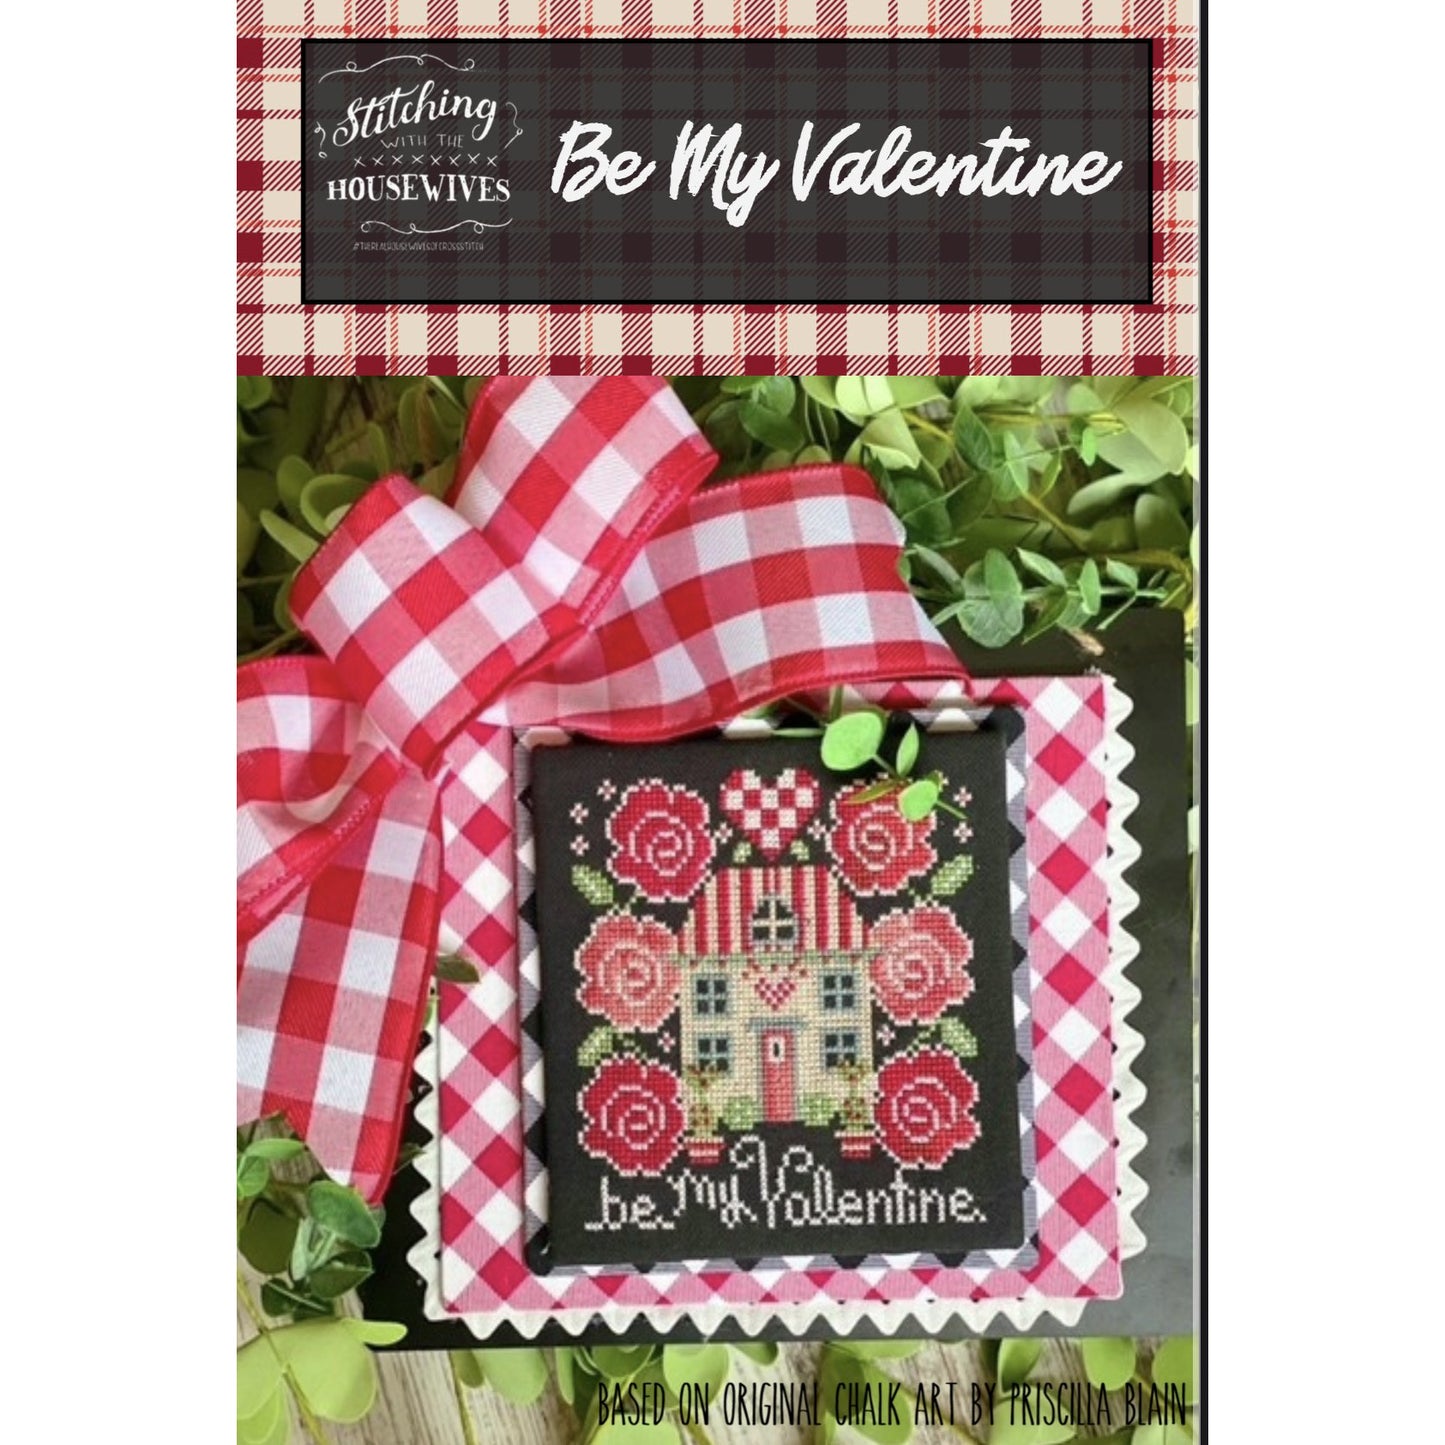 Stitching Housewives ~ Be My Valentine Pattern